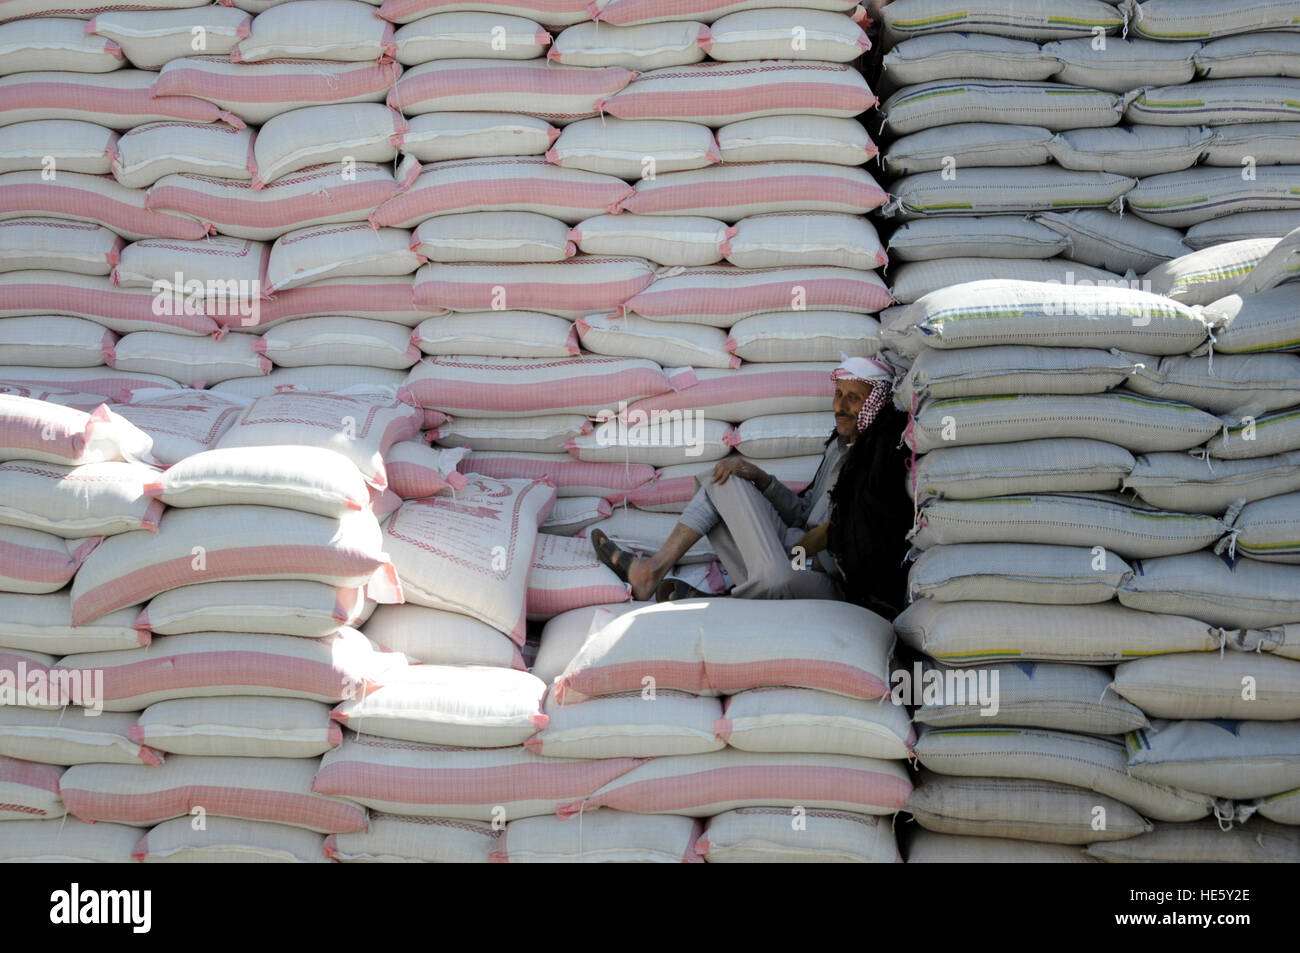 Sanaa, Yemen. 17th Dec, 2016. A man takes a rest on bags of wheat at a mill in Sanaa, capital of Yemen, on Dec. 17, 2016. Wheat market and mill centers fear an escalated famine after the biggest wheat trader has stopped new wheat imports due to a crisis at the central bank. Wheat price was about 25 percent higher in November on average across Yemen than they were before the ongoing conflicts. © Mohammed Mohammed/Xinhua/Alamy Live News Stock Photo